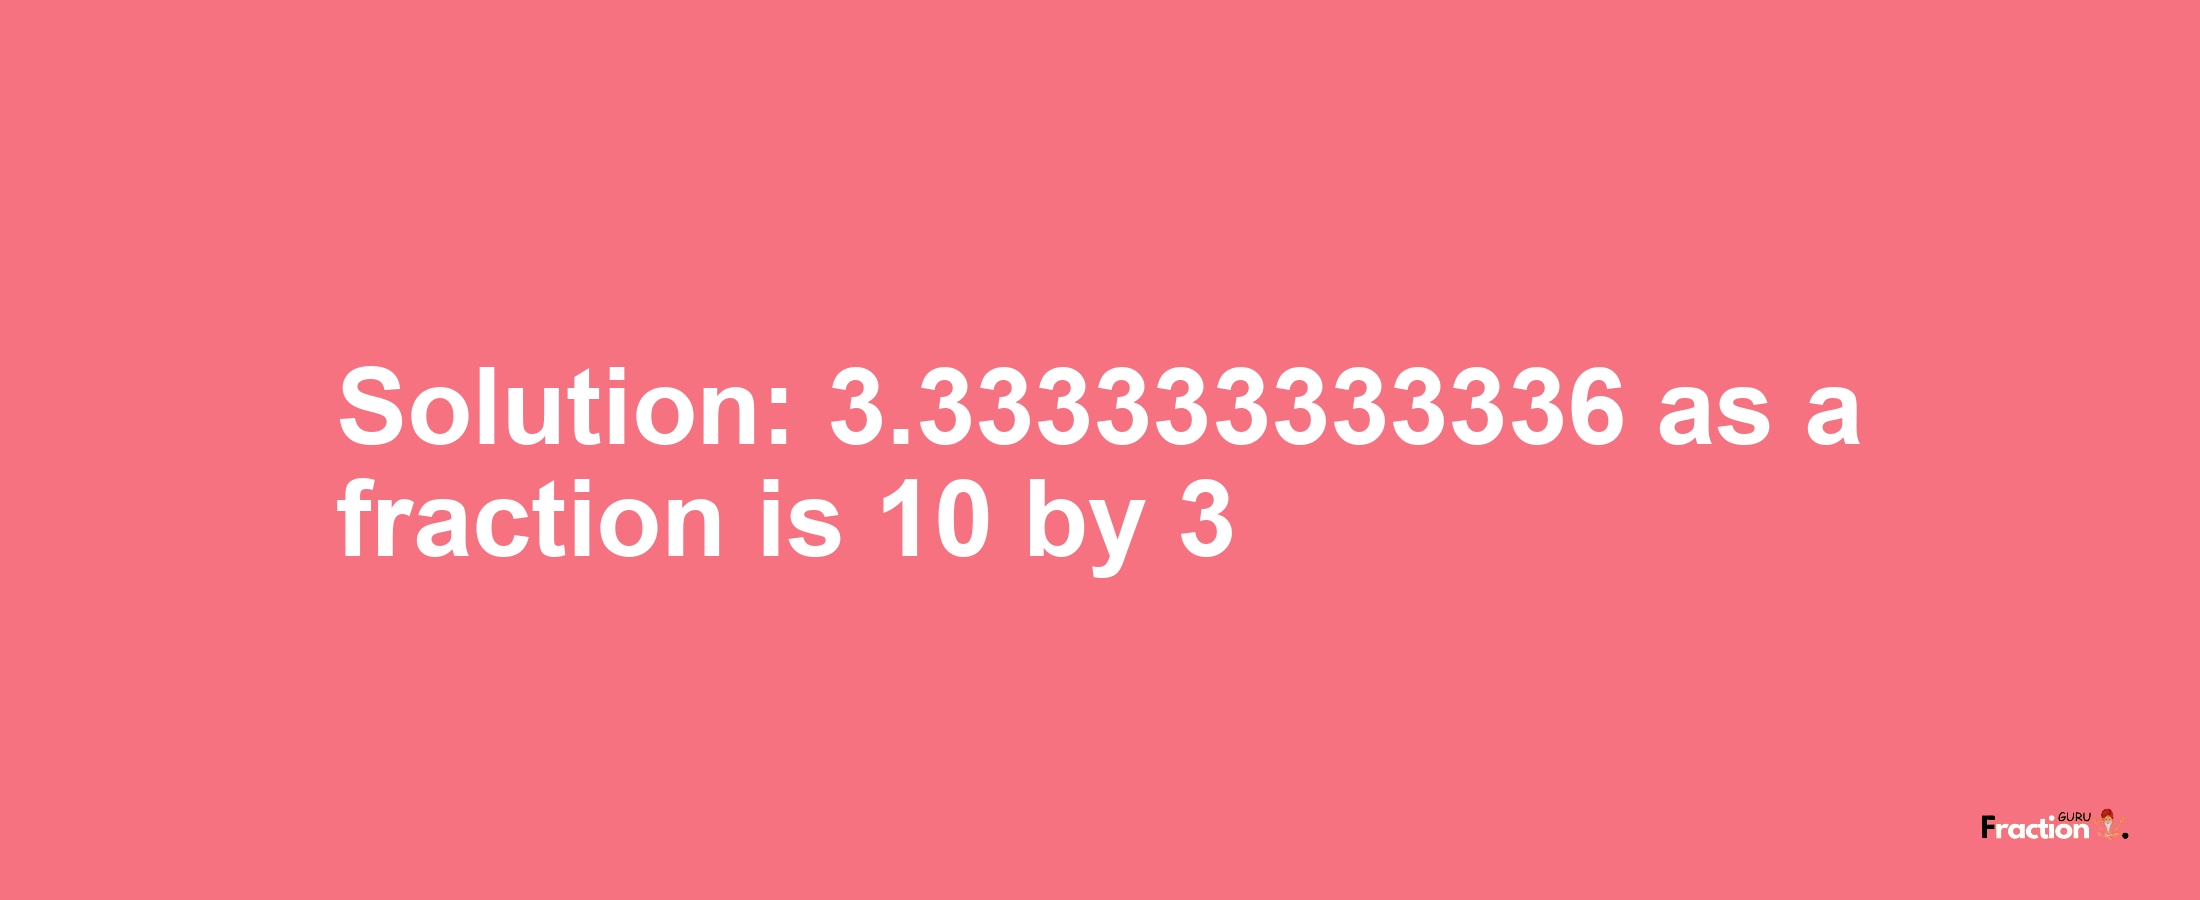 Solution:3.333333333336 as a fraction is 10/3